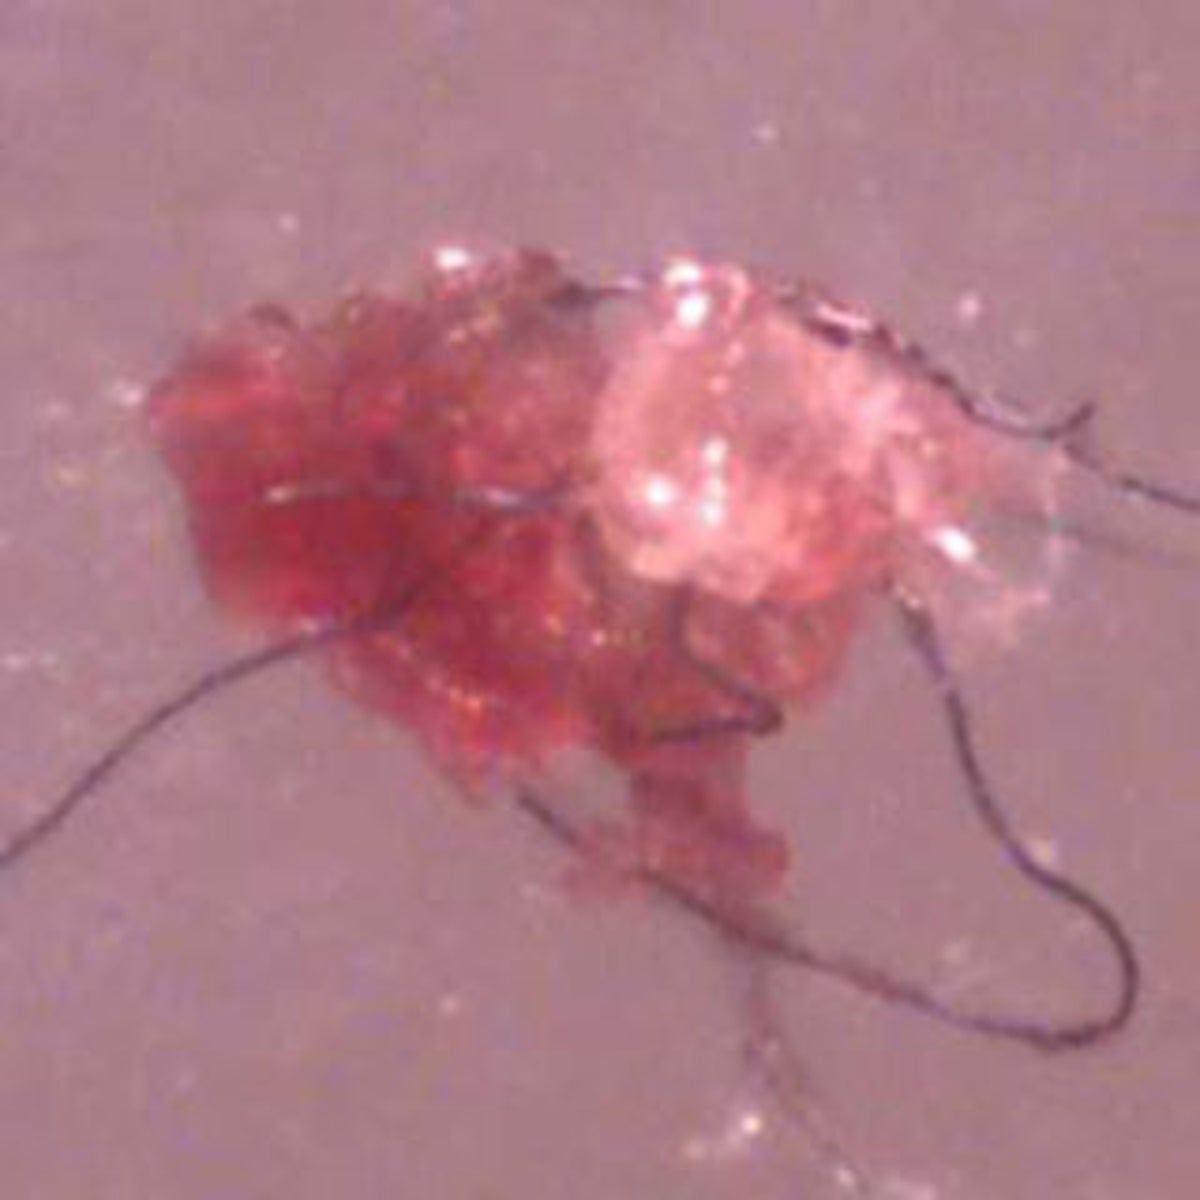 What is Morgellons Disease? Is it a physical or psychological